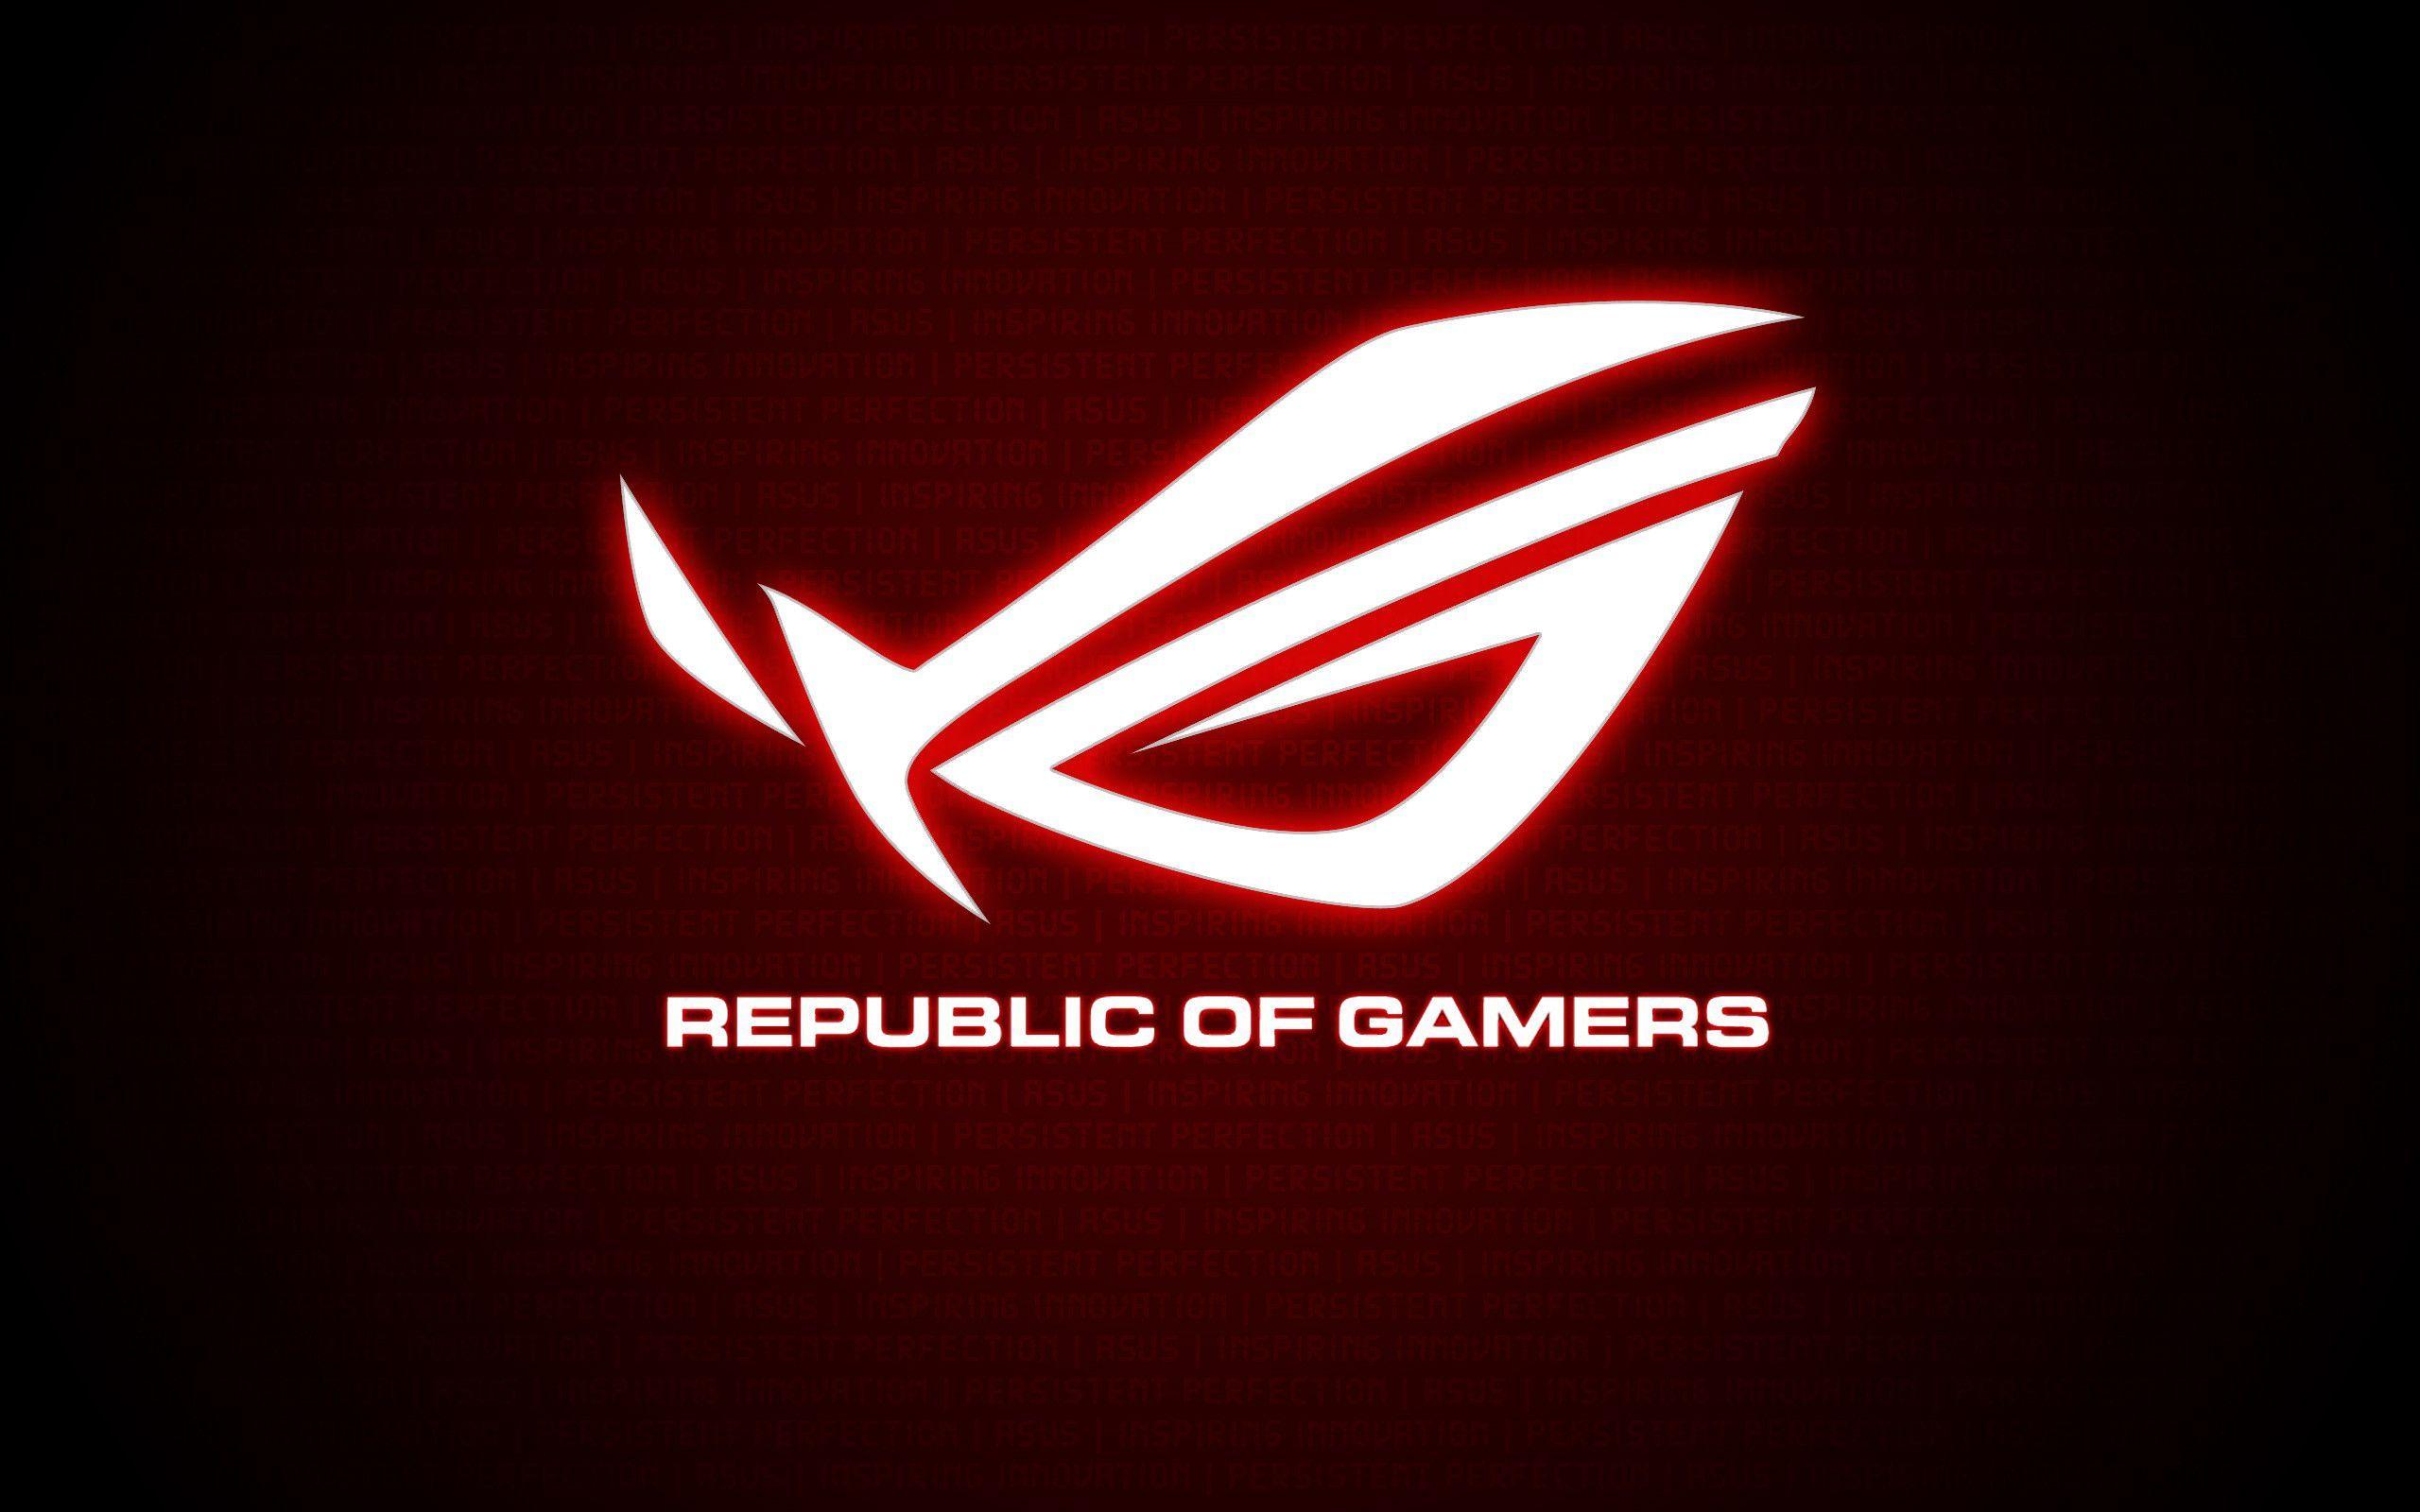 ROG Wallpaper Collection 2013 of Gamers